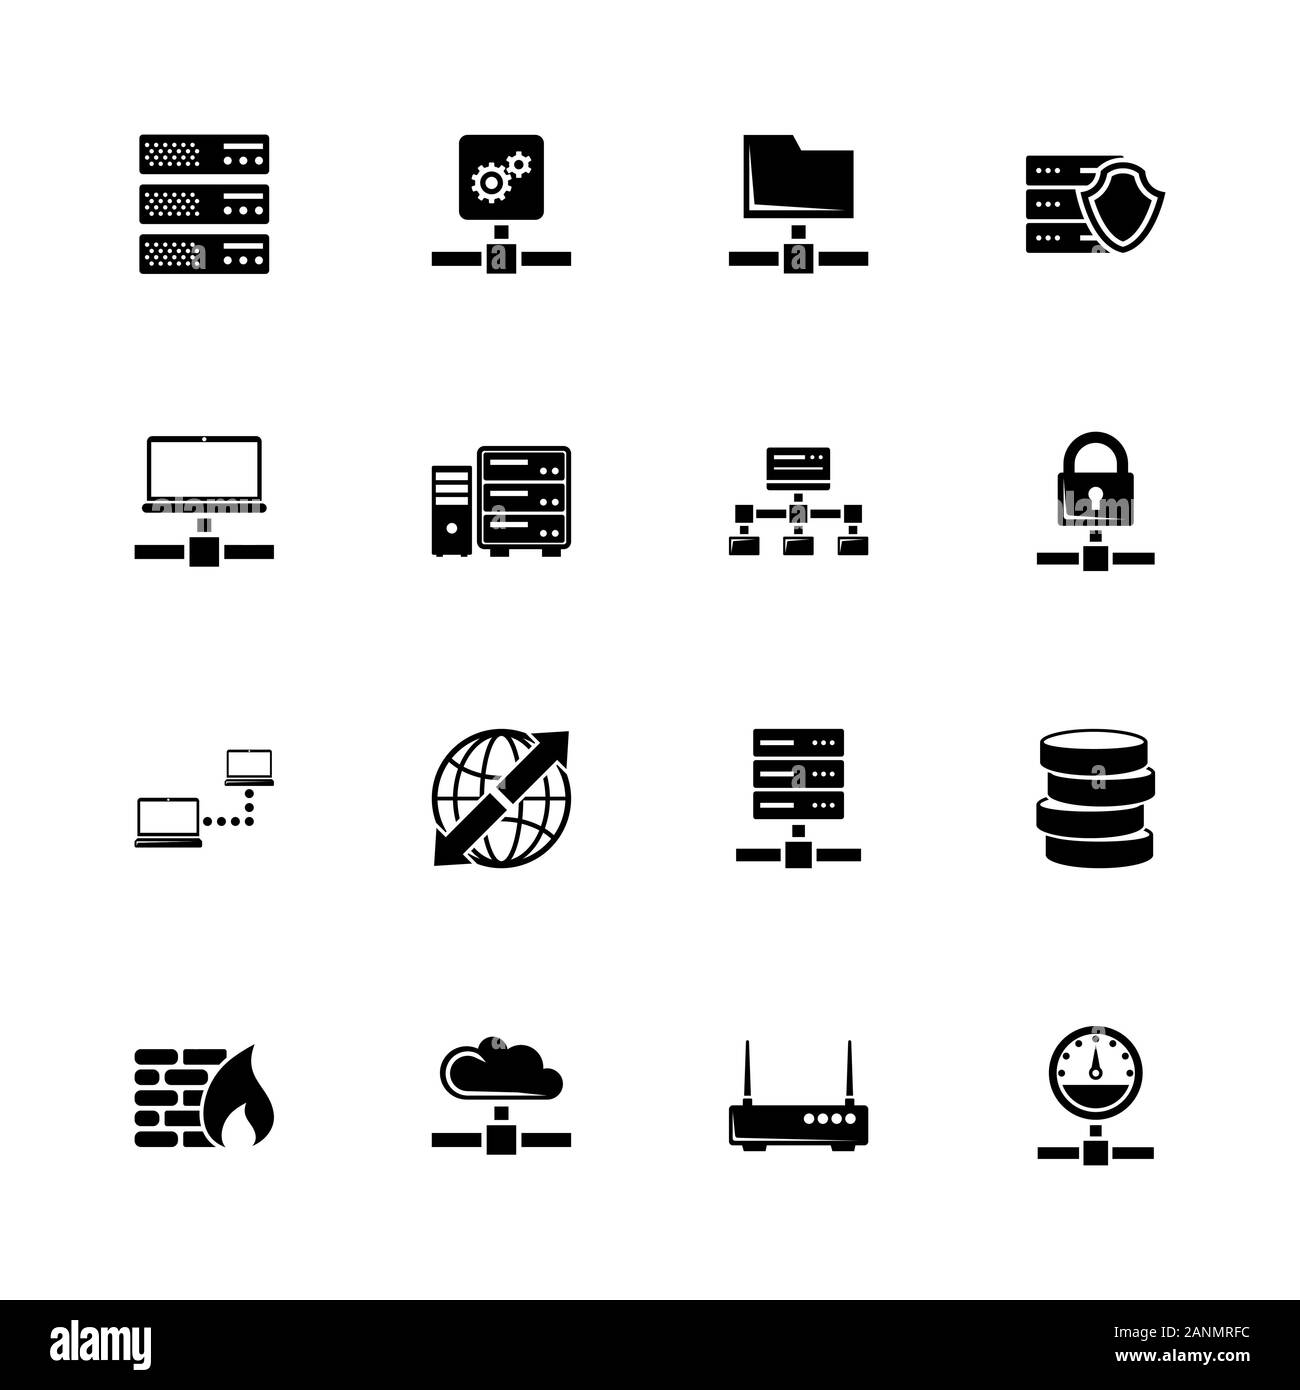 Network Servers icons - Expand to any size - Change to any colour. Flat Vector Icons - Black Illustration on White Background. Stock Vector